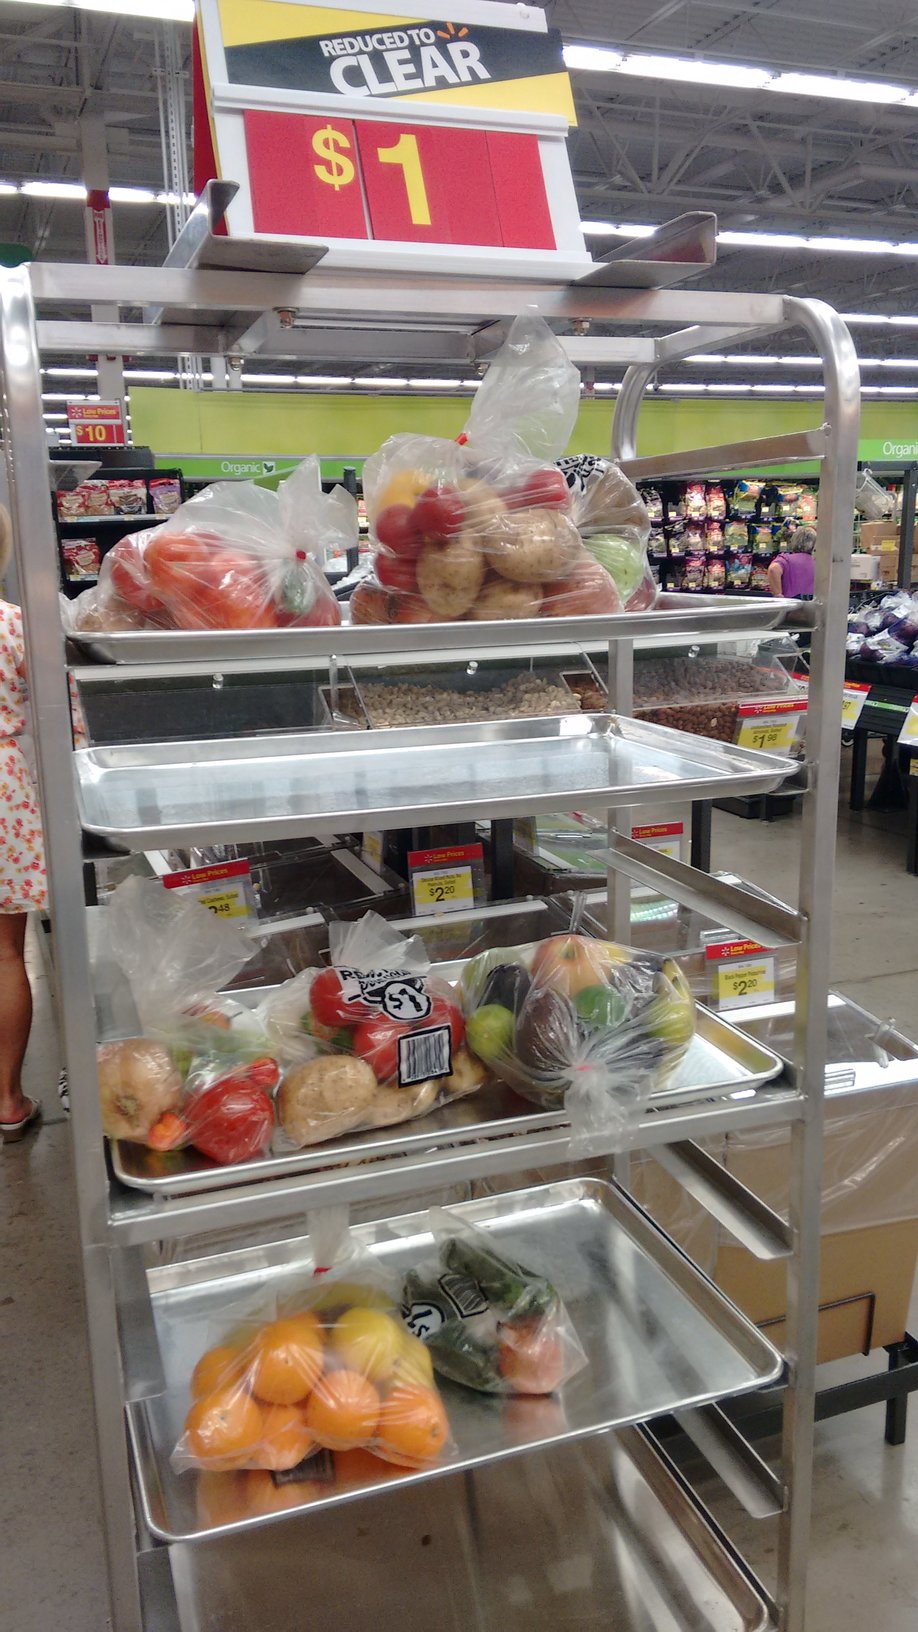 Walmart Canada: Reduced Bags of Produce For $1 | Canadian Freebies, Coupons, Deals, Bargains ...